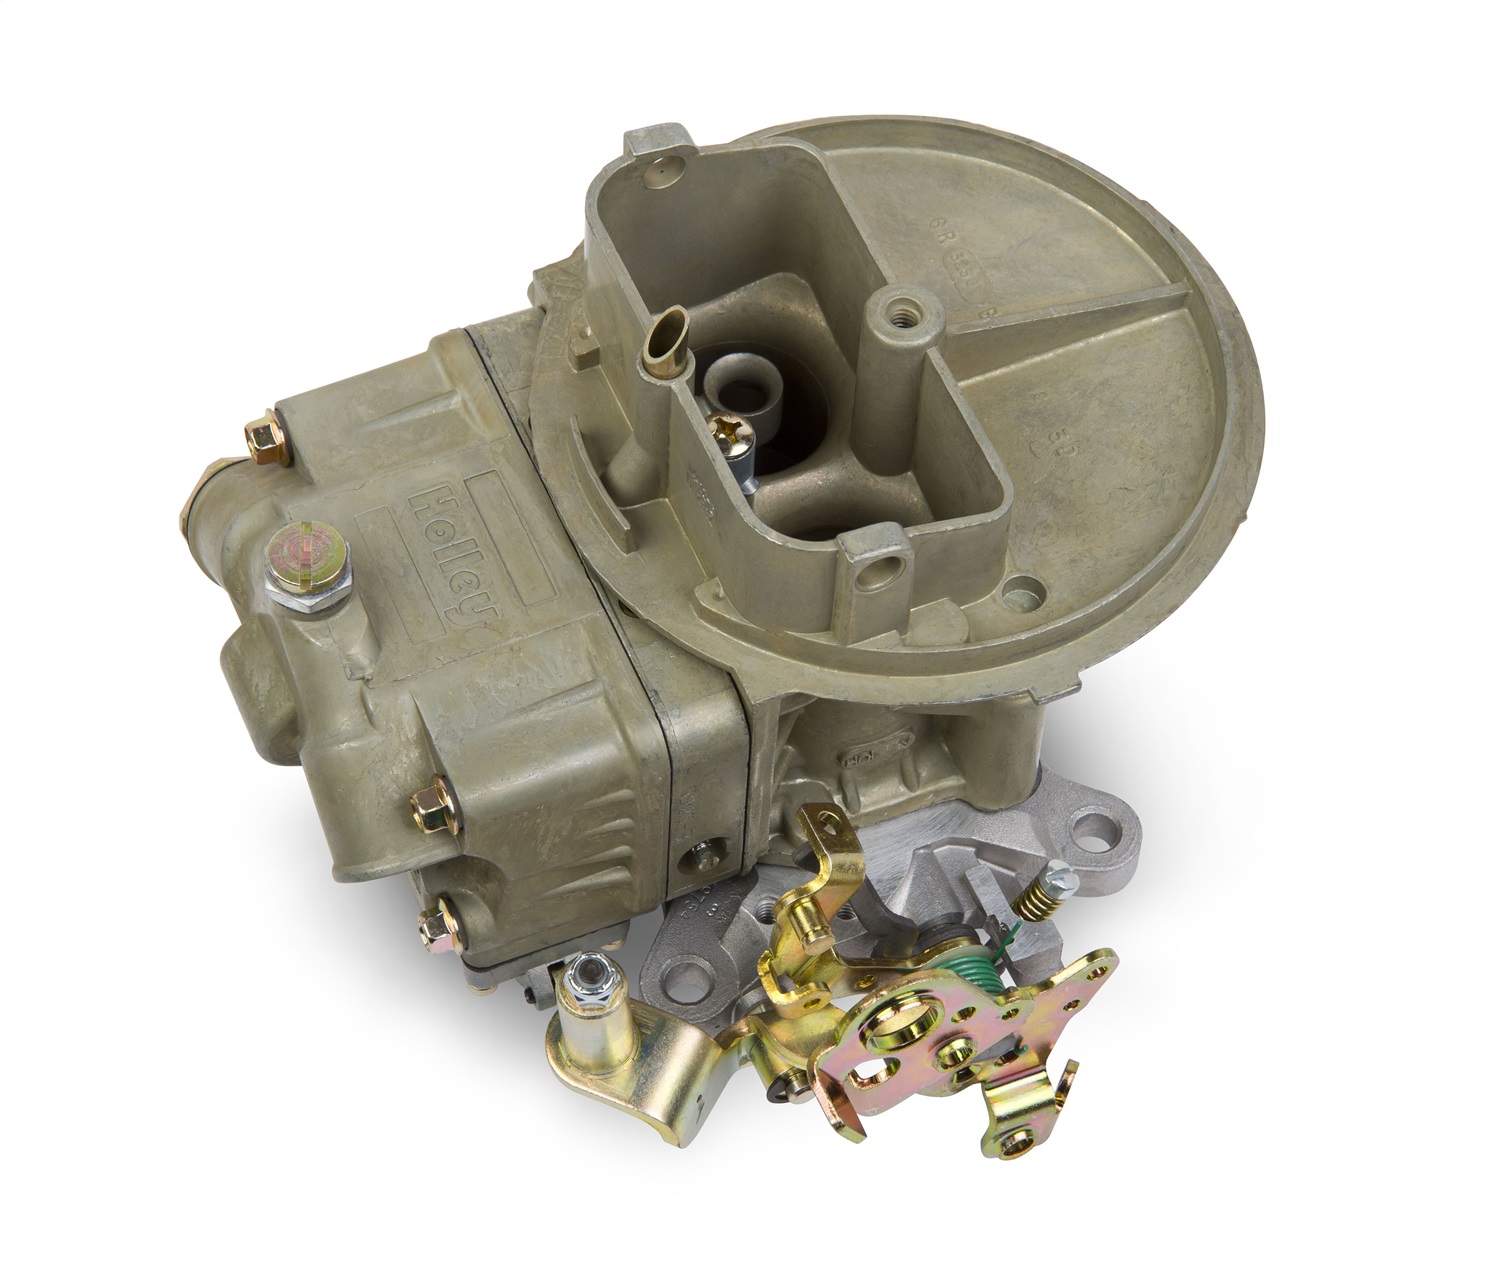 Holley Performance Holley Performance 0-4412CT Race Carburetor